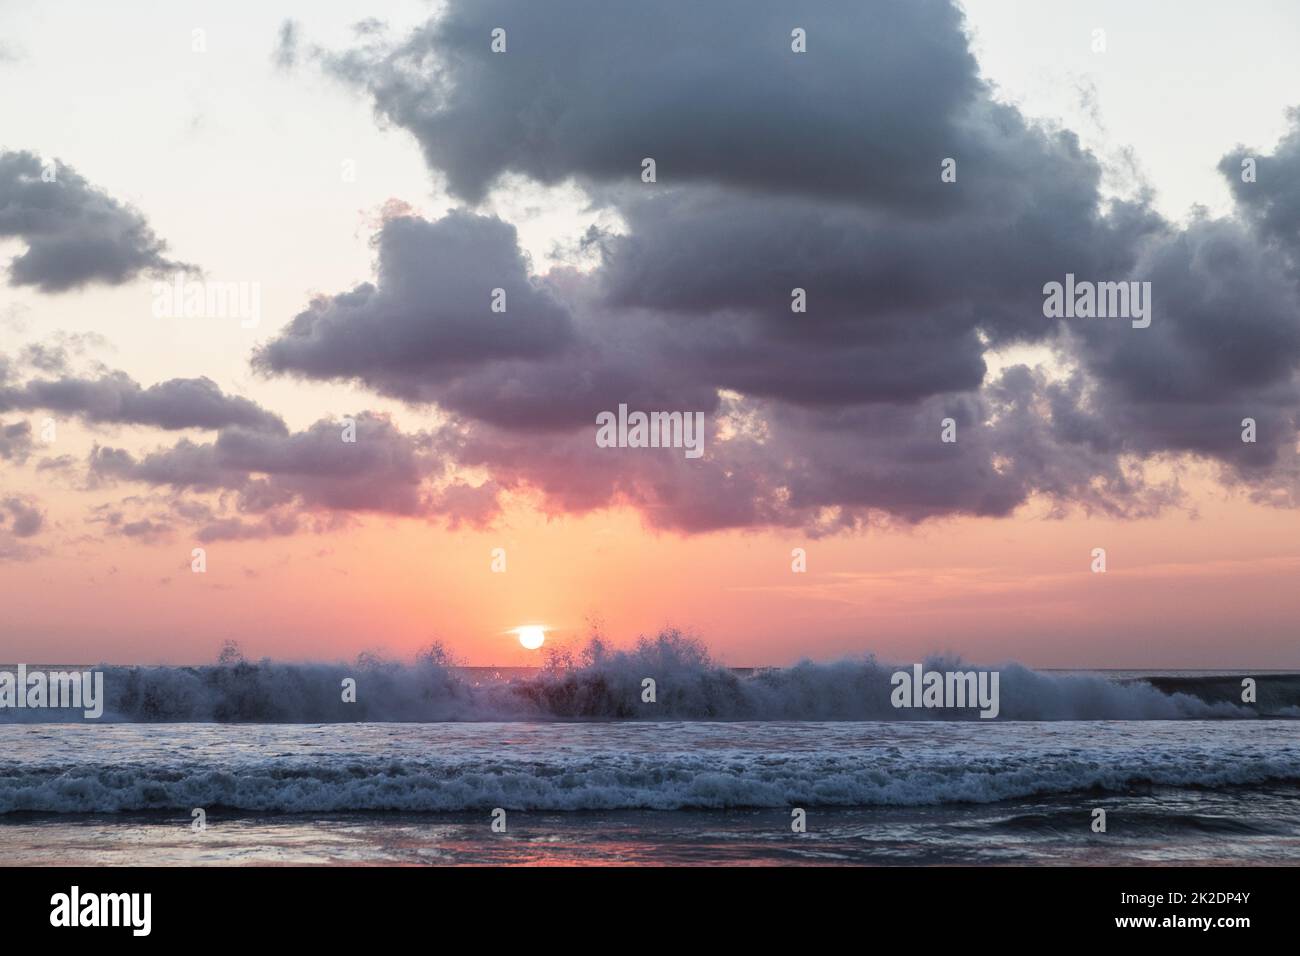 Sunset on the beach. Scenic seascape with clouds, waves and sun. Stock Photo